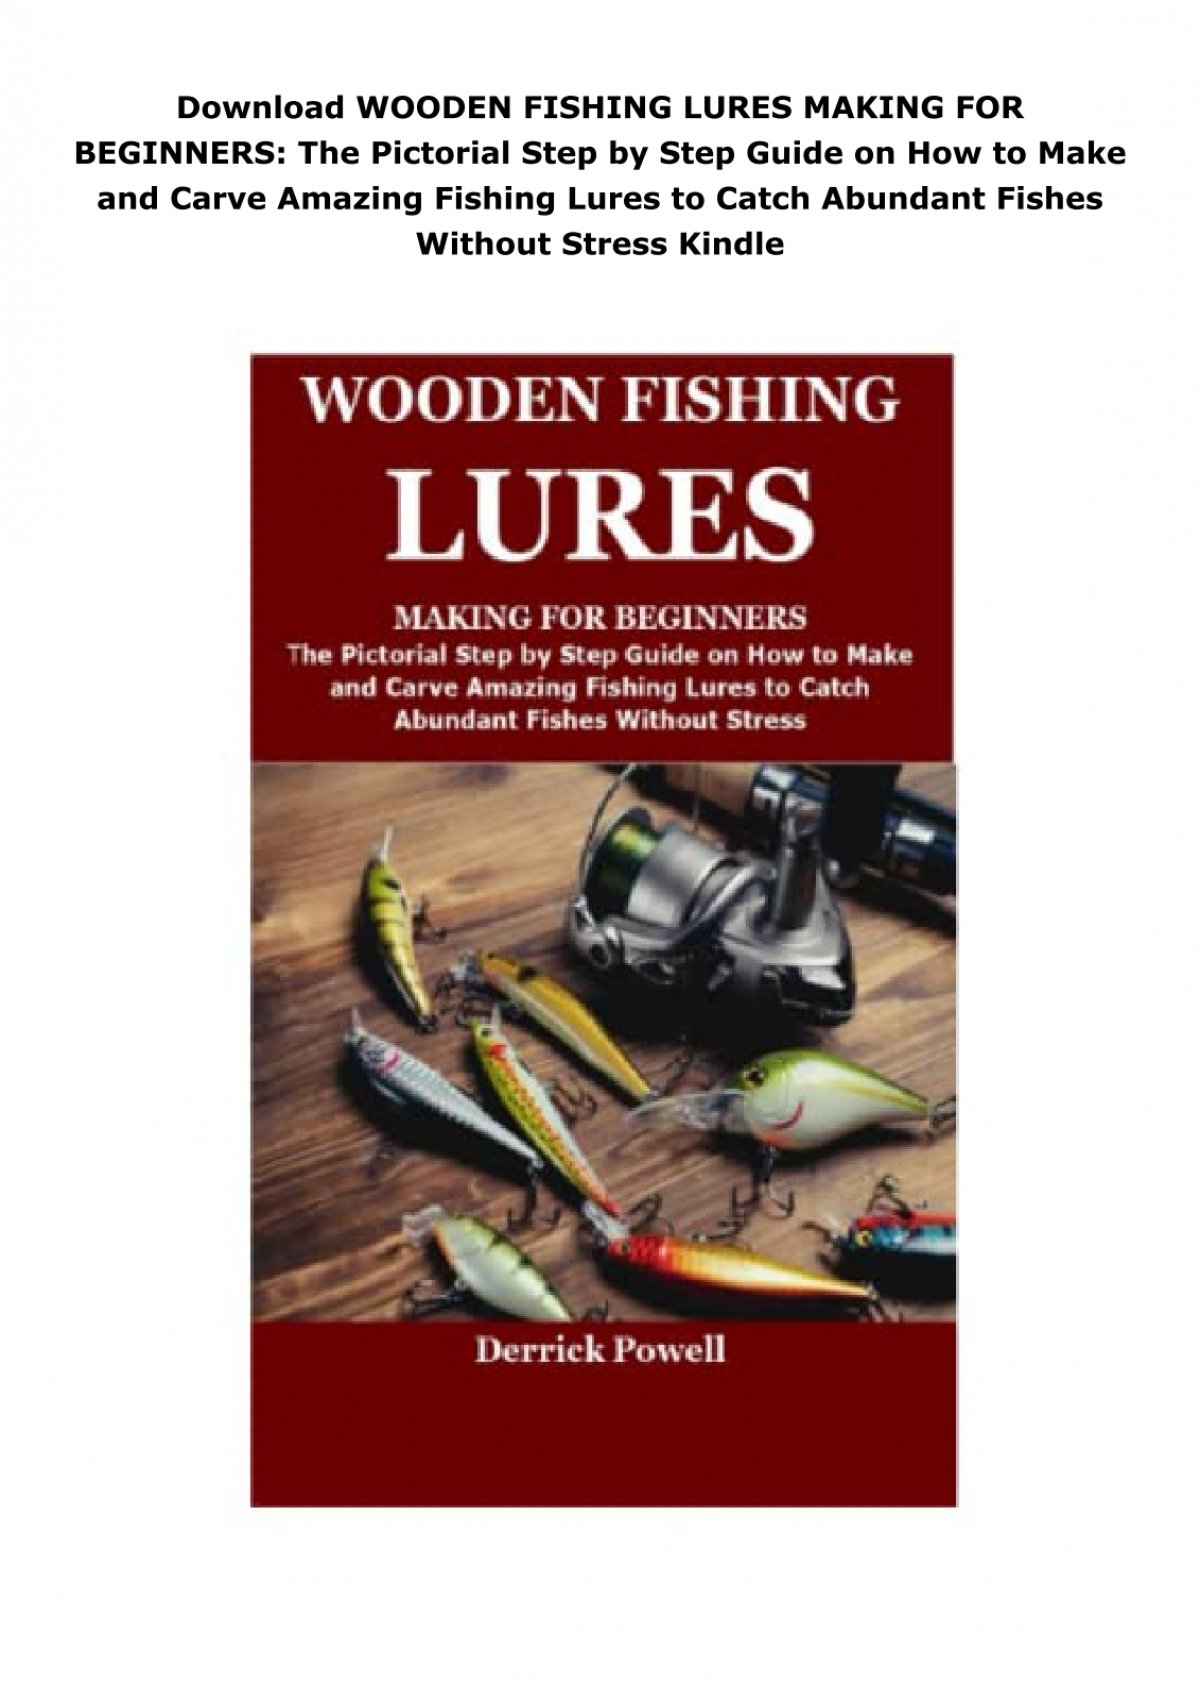 Download WOODEN FISHING LURES MAKING FOR BEGINNERS: The Pictorial